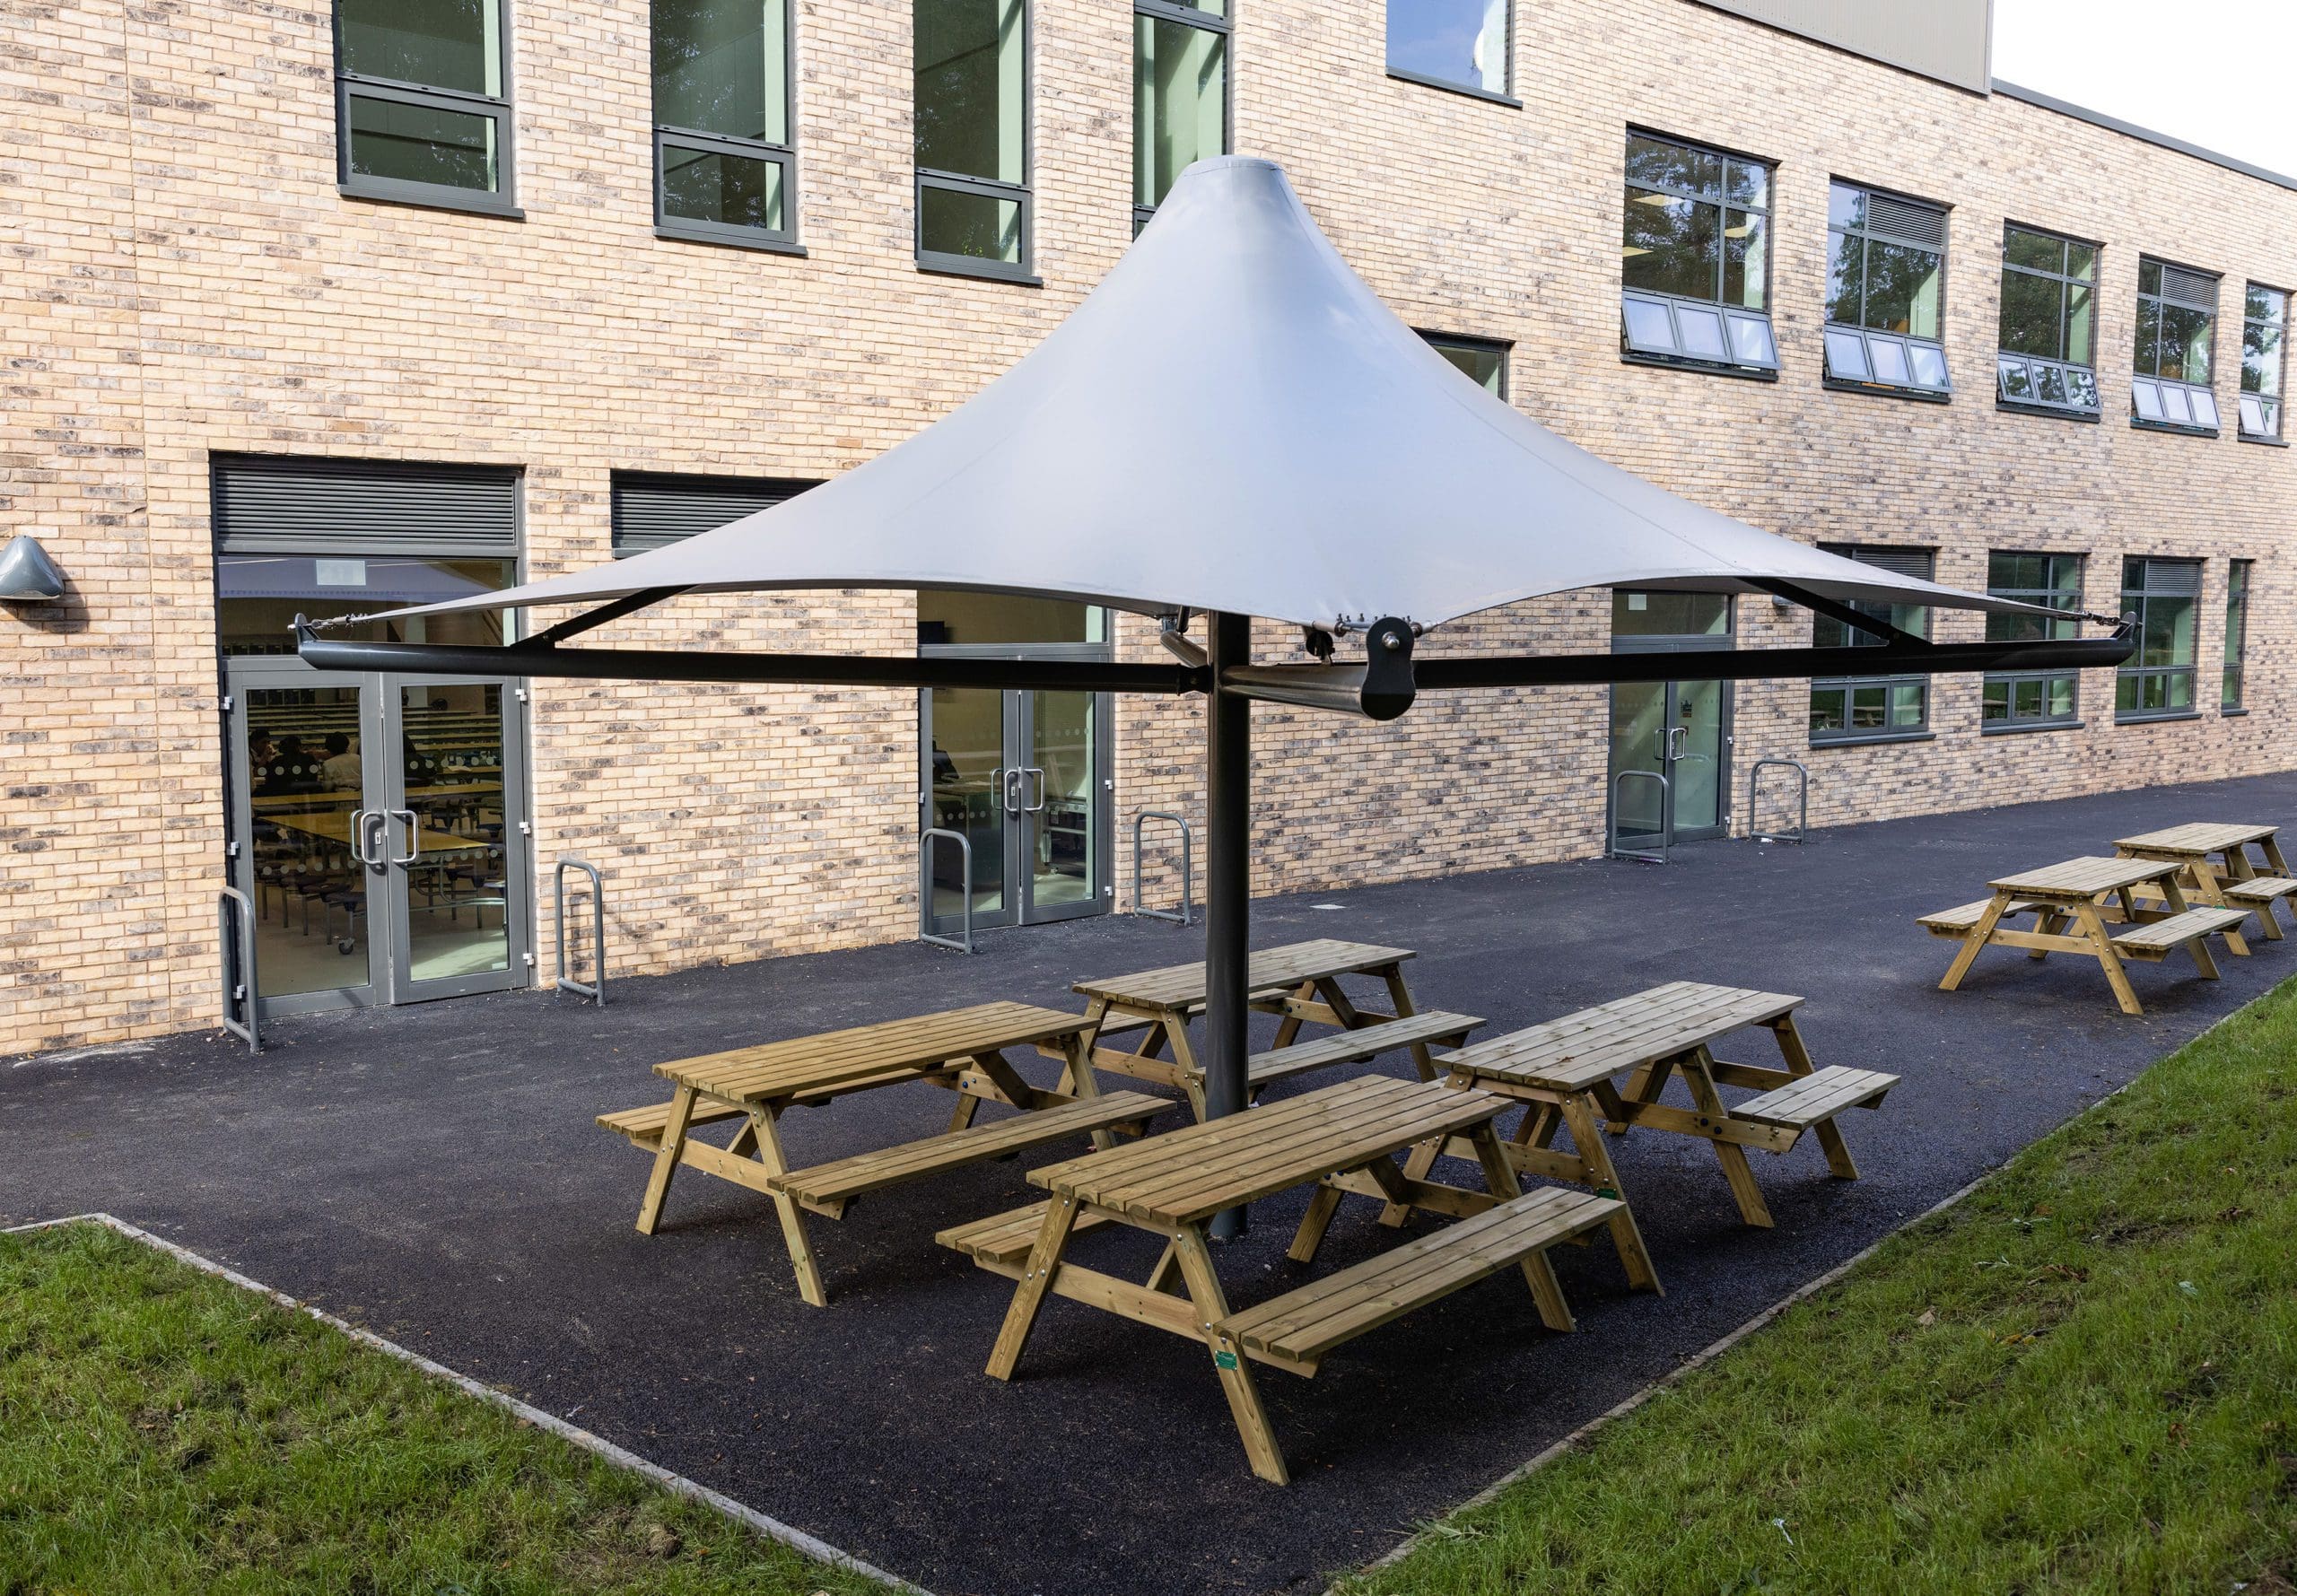 Large outdoor stretch square parasol over 4 wooden picnic tables